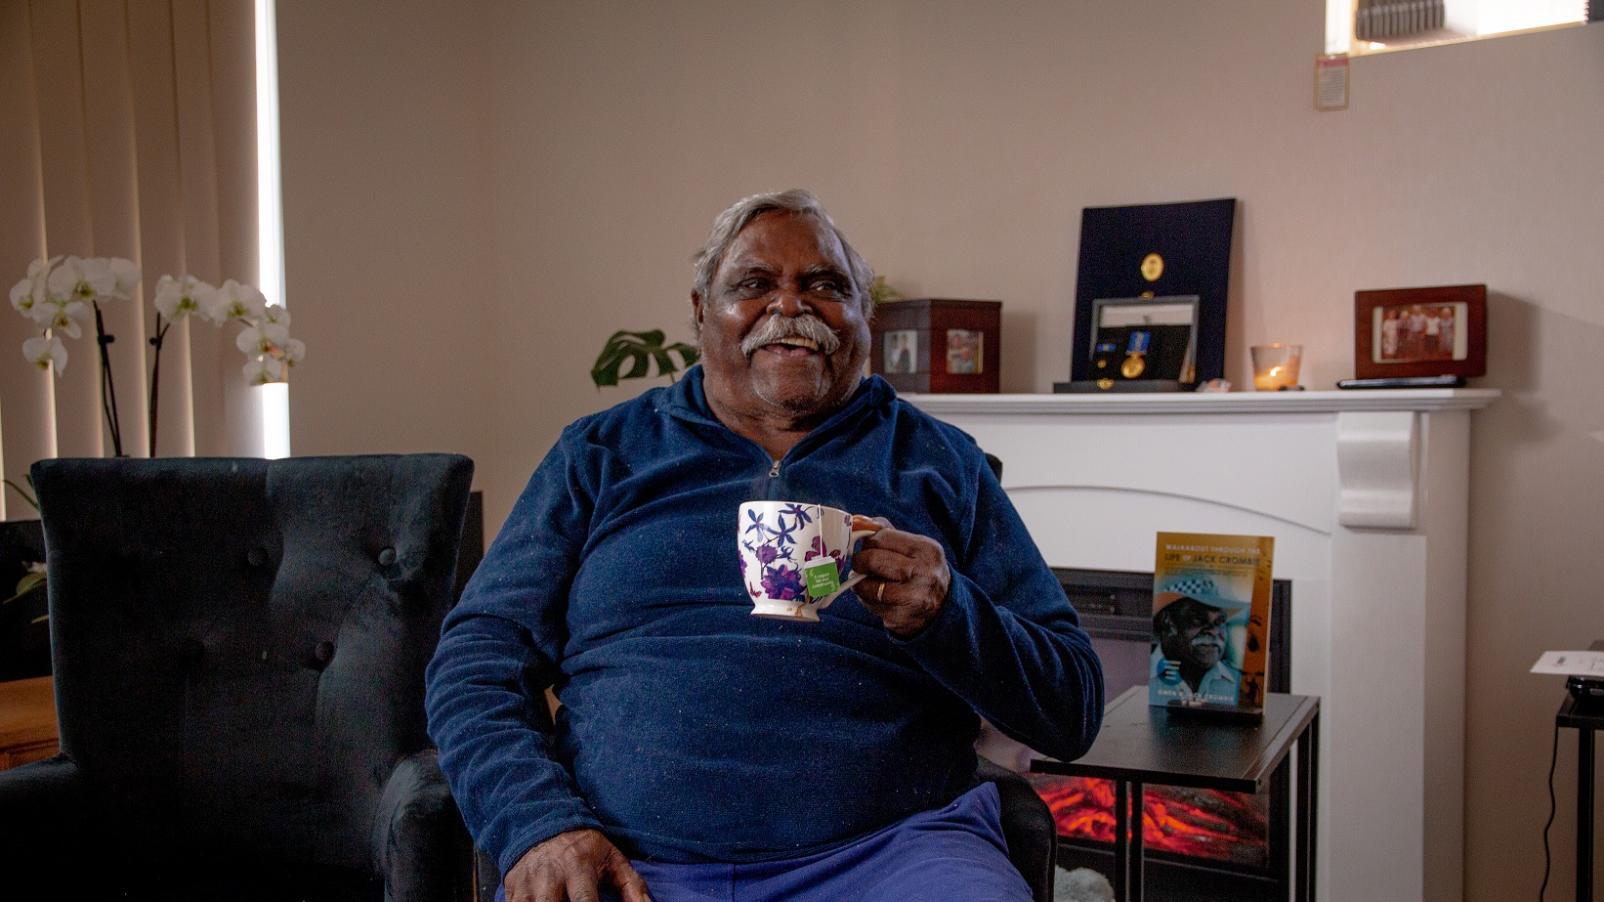 A man sitting in his living room holidng a coffee mug and smiling